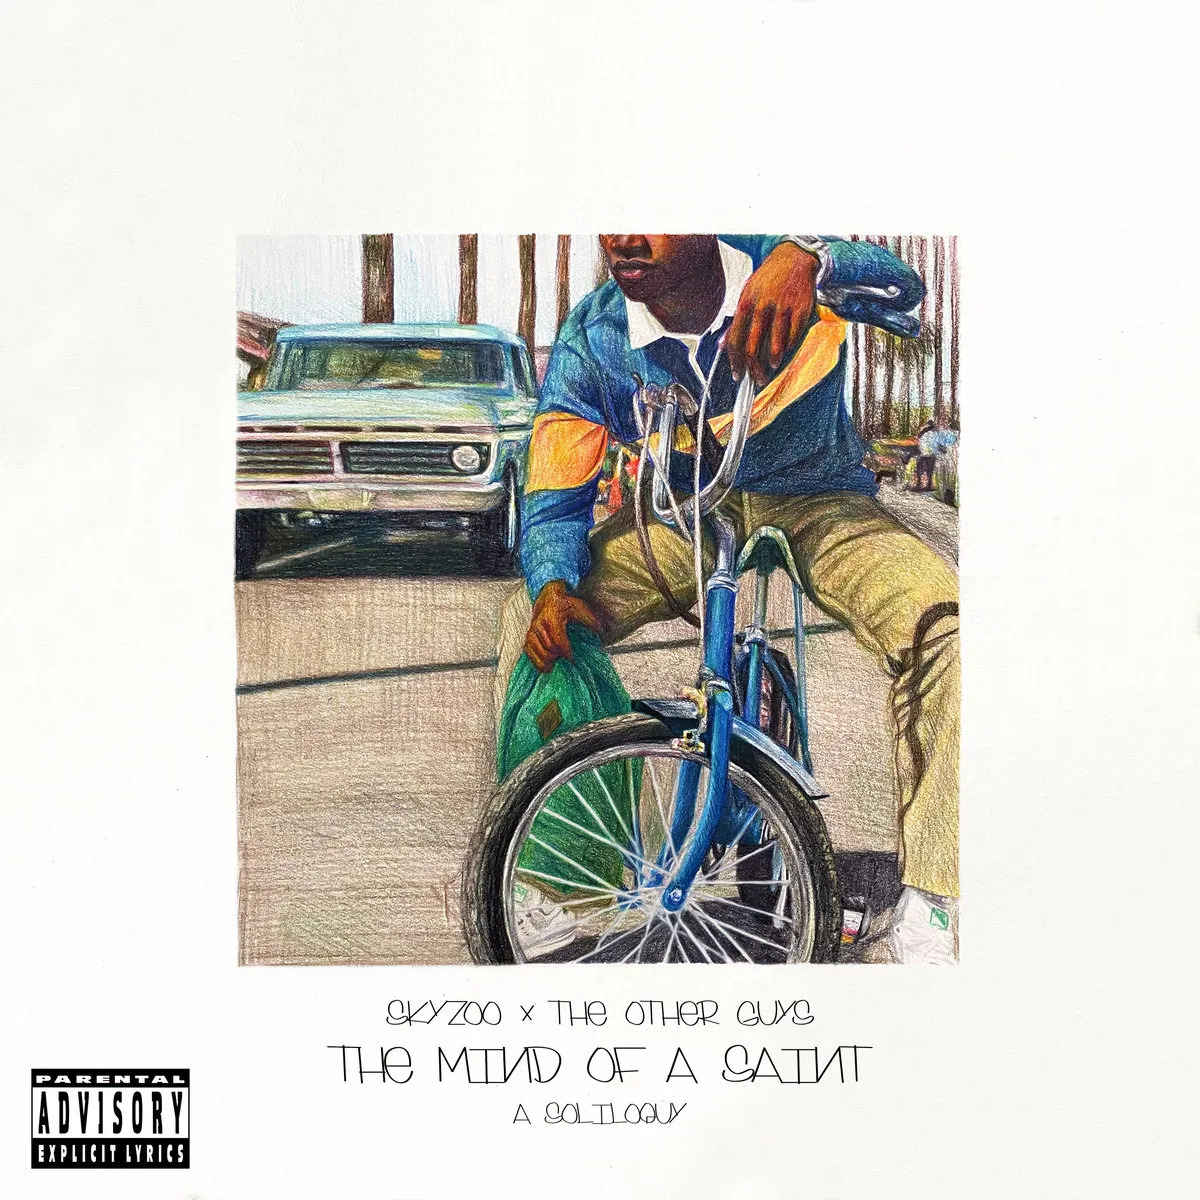 Skyzoo & The Other Guys "The Balancing Act" (Audio)